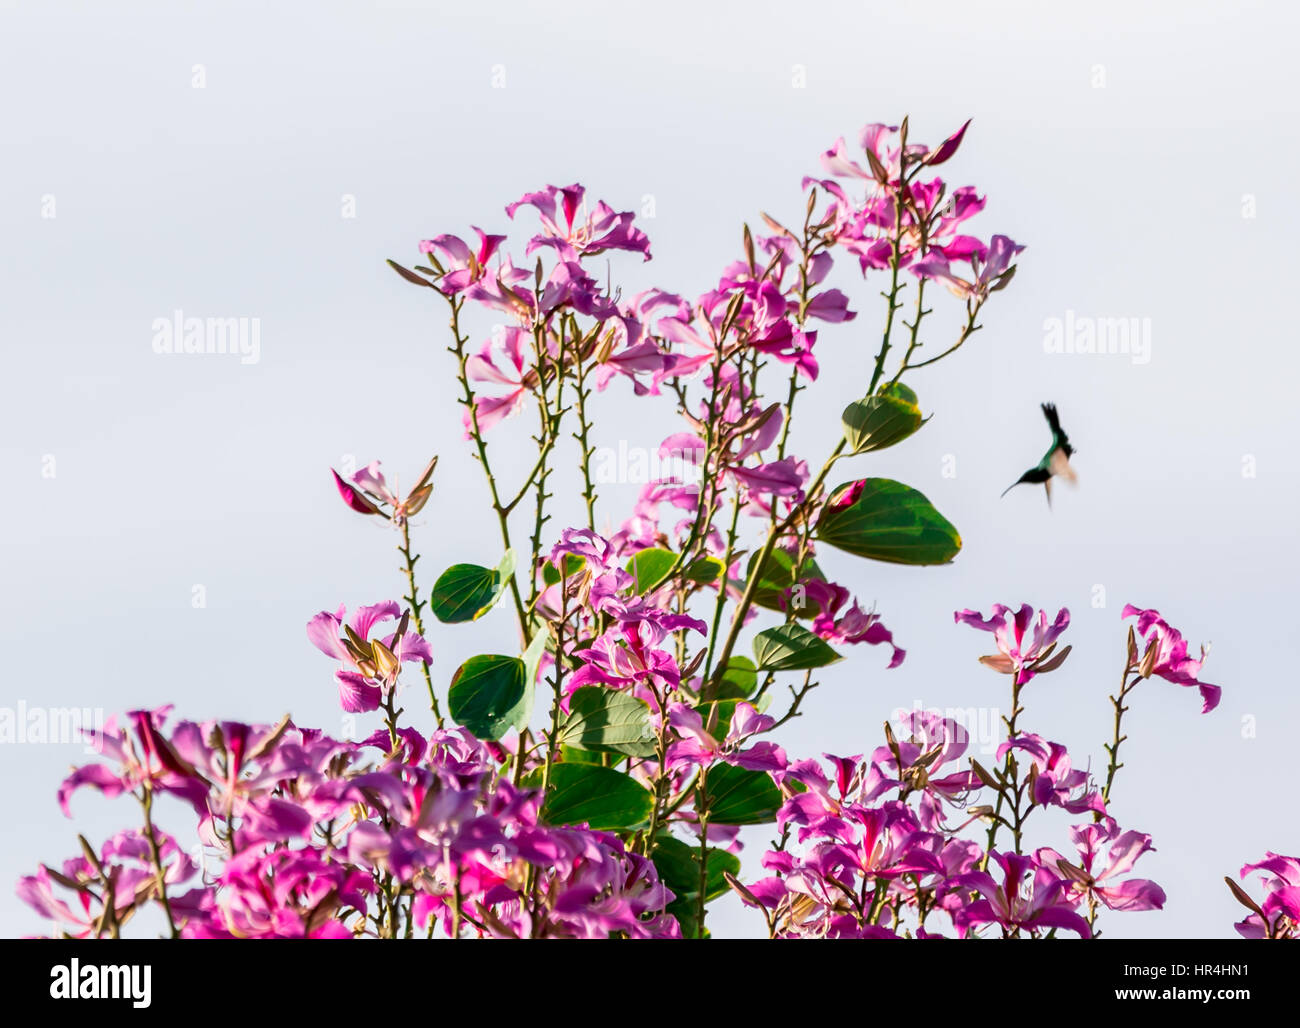 humming bird approaching a tree full of flowers in Gustavia St Bart's Stock Photo